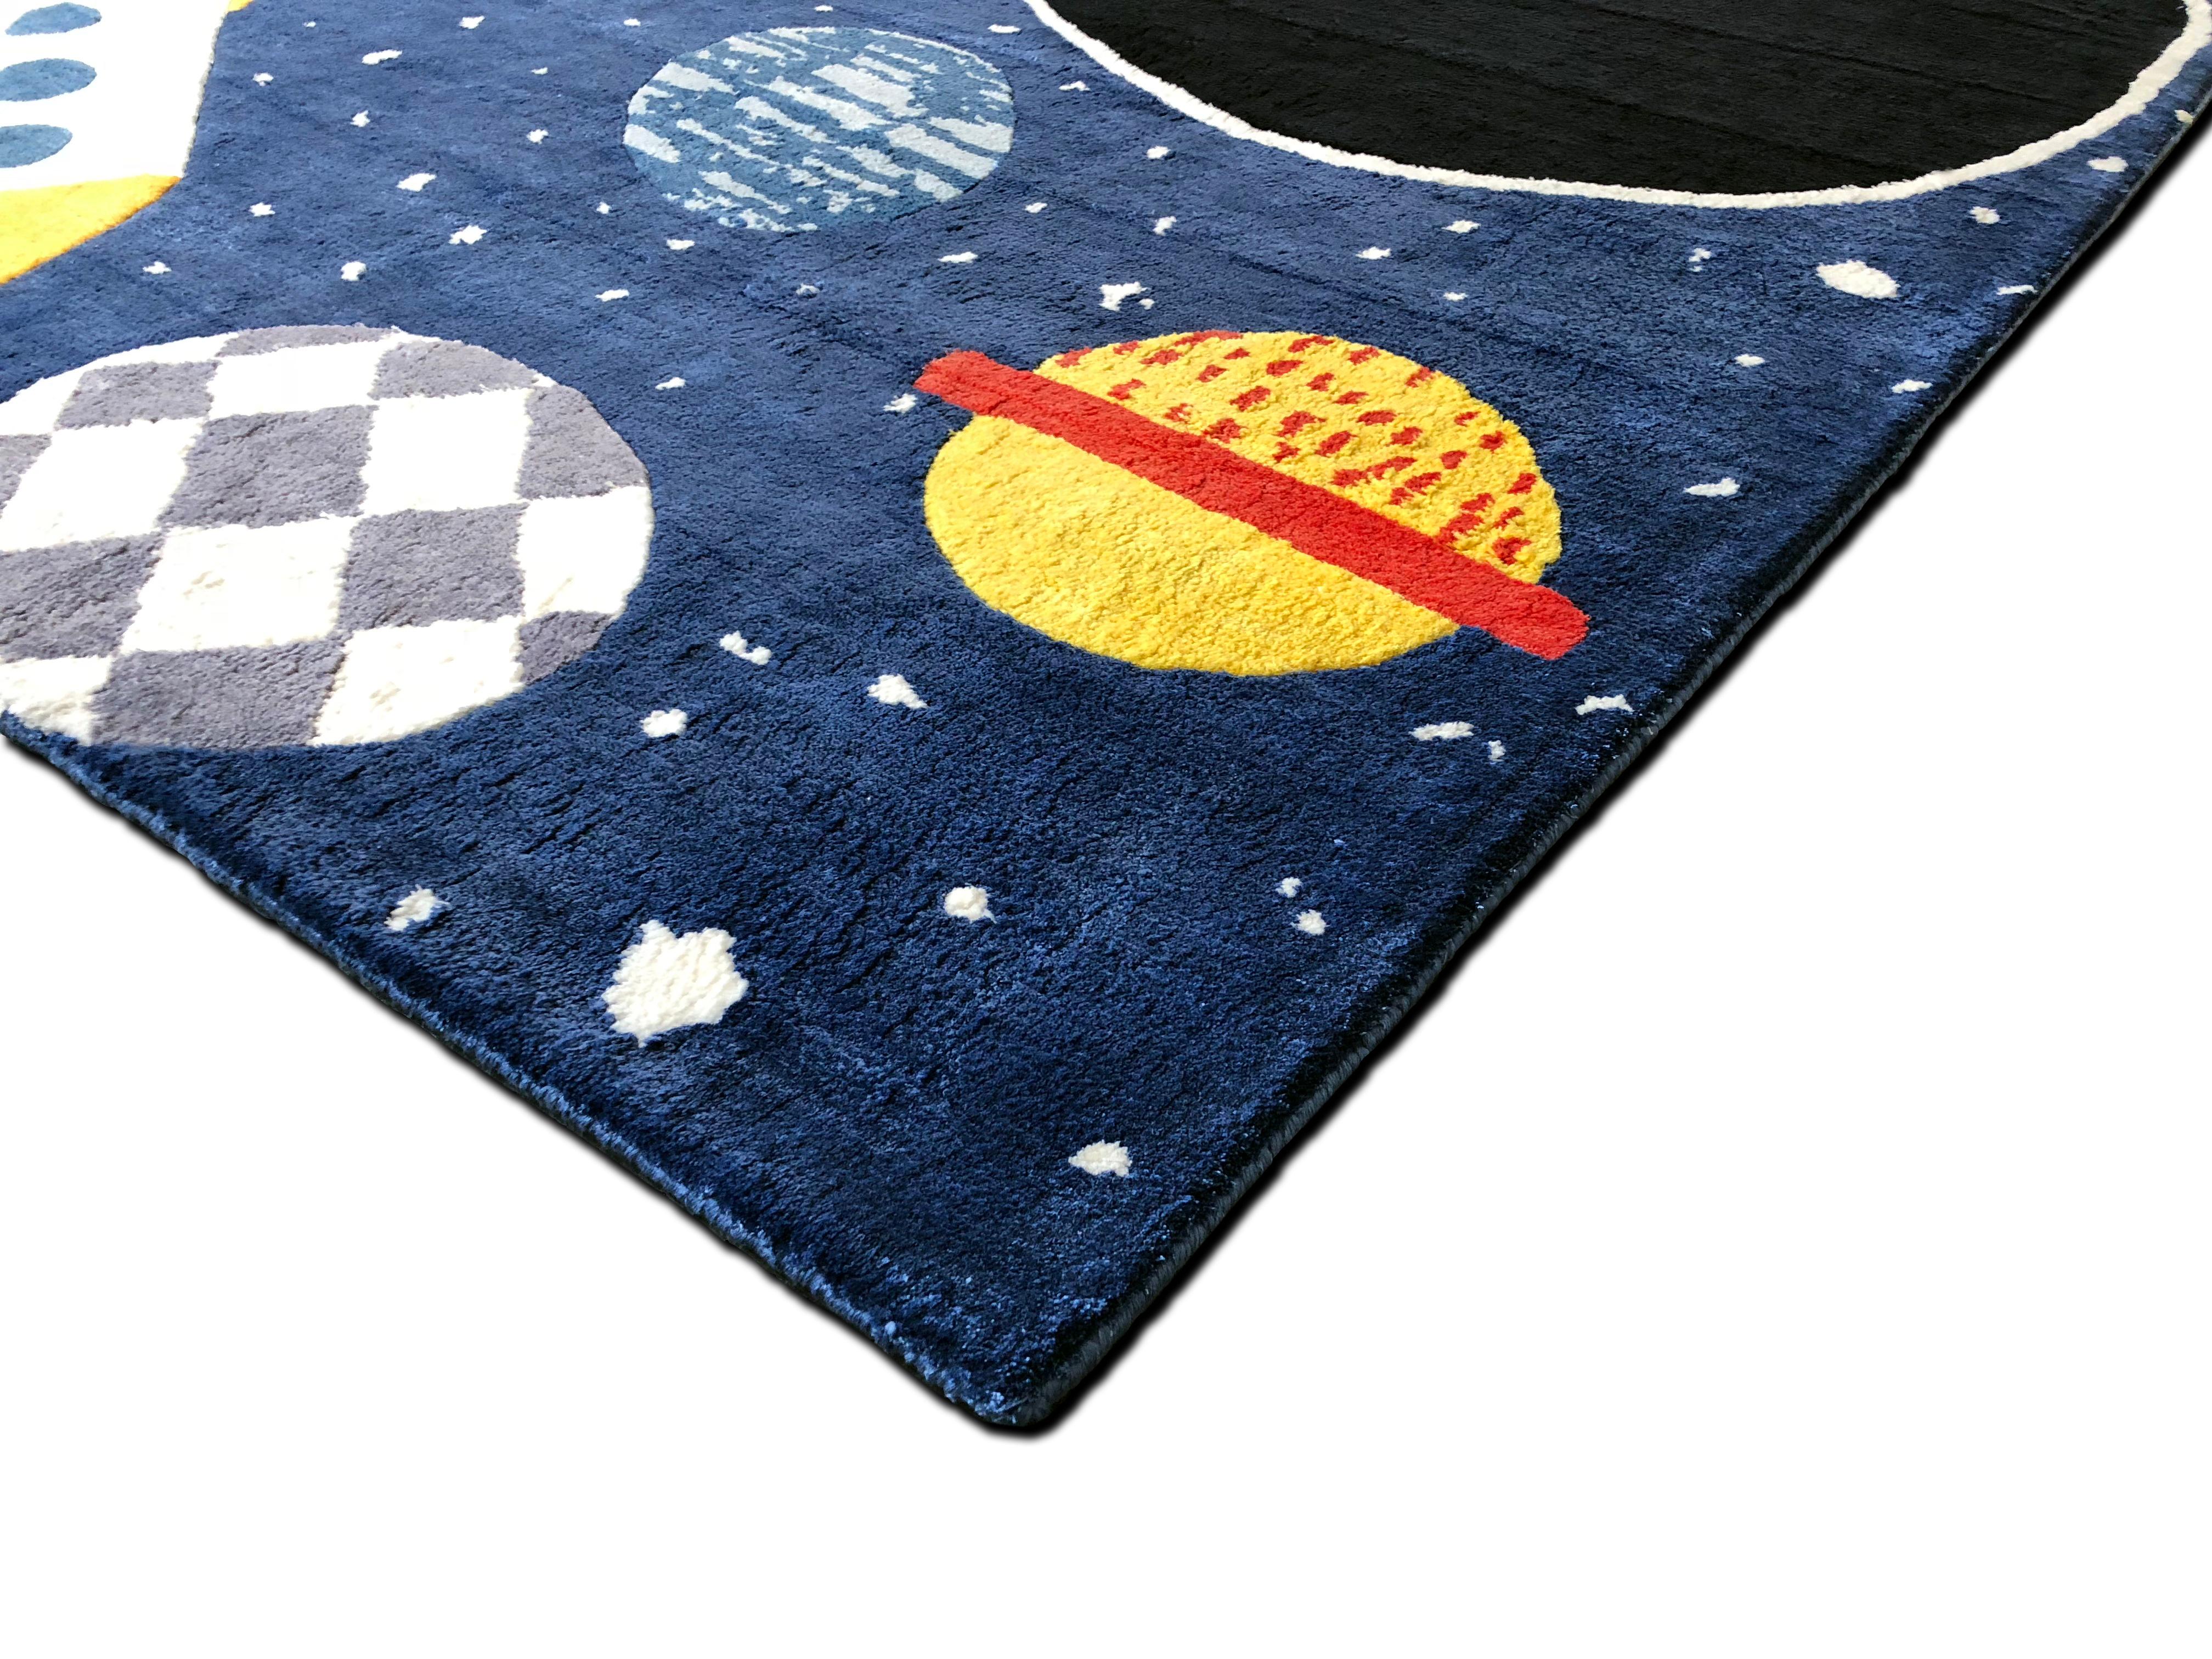 SPACE ACE RUG by Daria Solak, Hand Knotted, 100% New Zealand Wool 150 x 190 cm In New Condition For Sale In London, GB